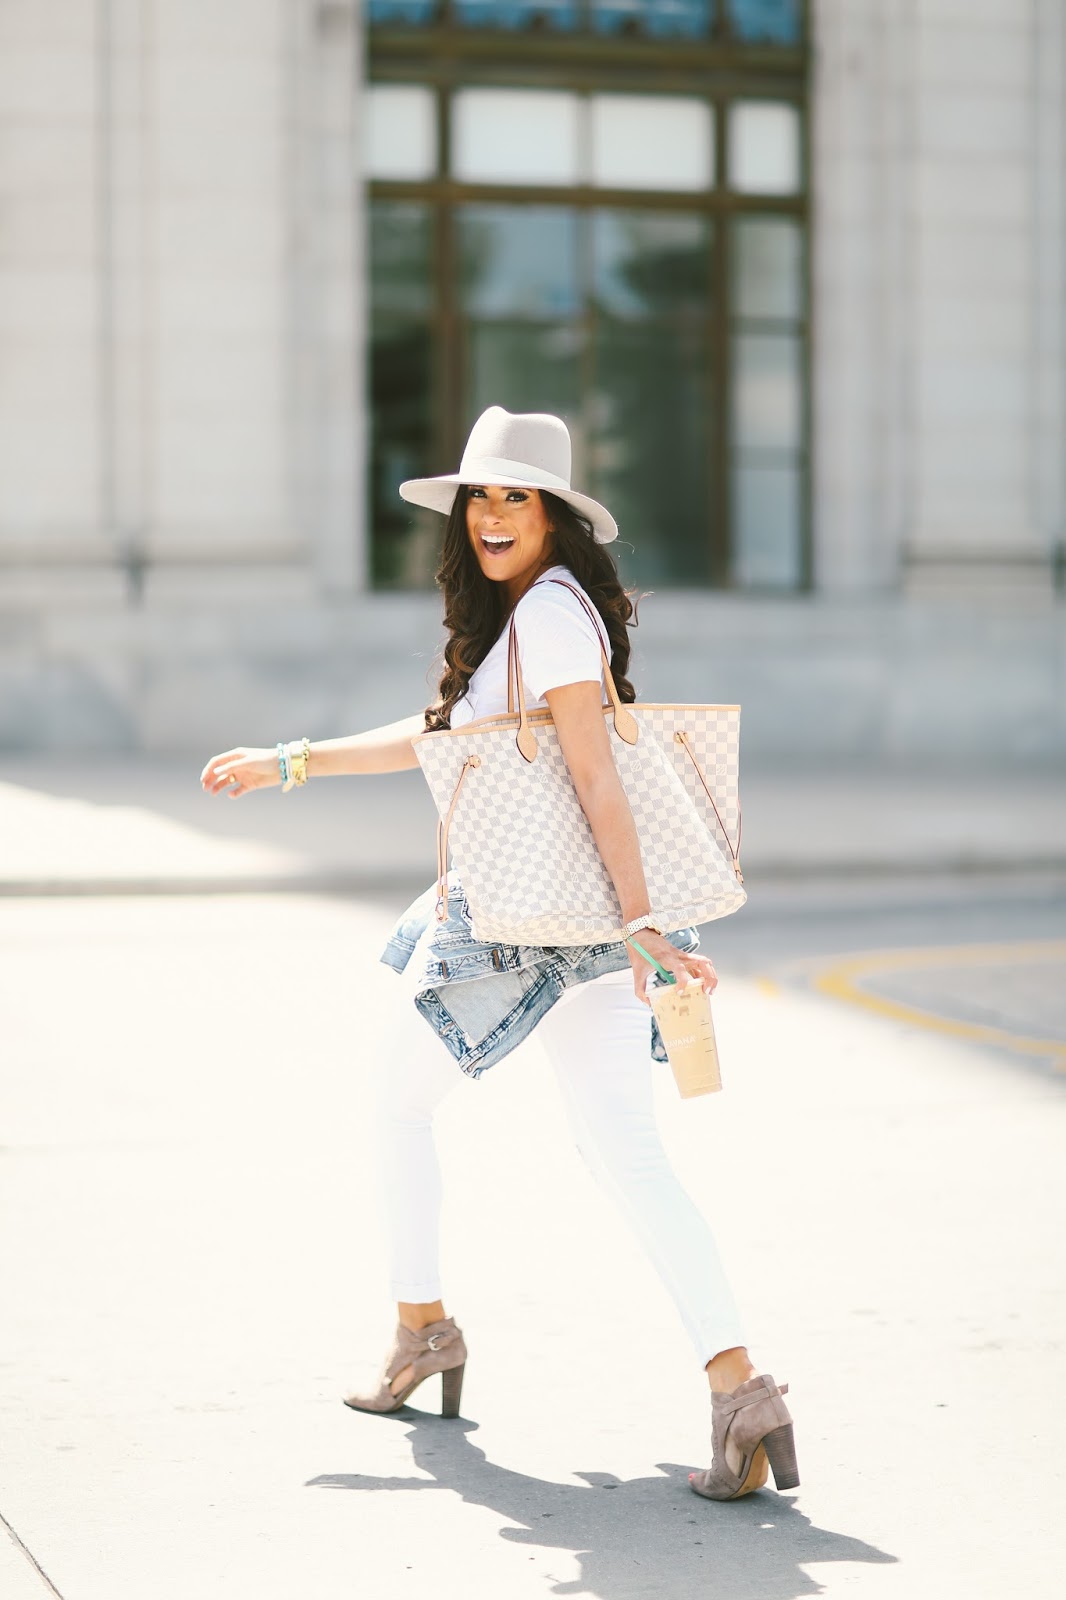 all white outfits for spring and summer, louis vuitton neverful damier azur, j brand white distressed denim, white tee made well, janessa leone grey hat, summer fashion pinterest, spring fashion pinterest, outfit idea summer pinterest, tulsa fashion blogger, downtown tulsa, vince camuto conley bootie, michele Serein watch 18mm, david yurman bracelet stack, emily gemma, the sweetest thing blog, 